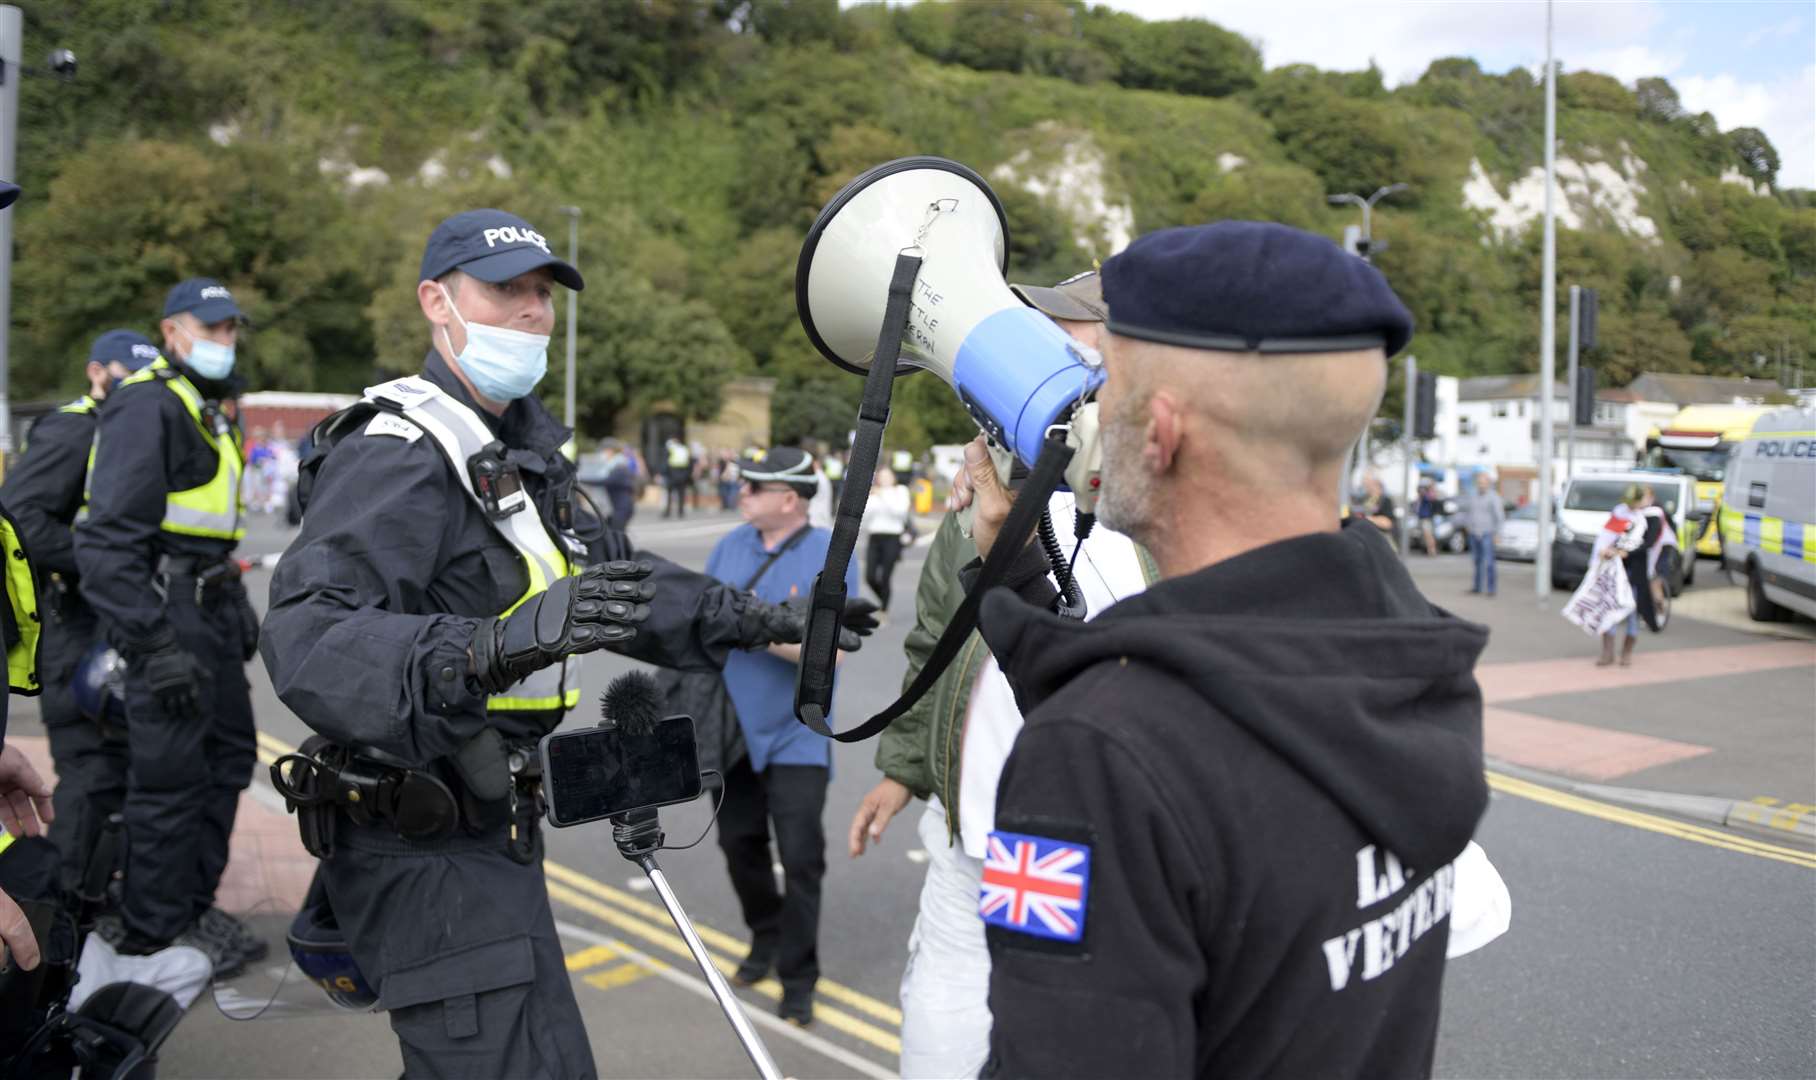 Nationalist YouTuber 'Little Veteran' addresses the protest though a megaphone. Picture: Barry Goodwin